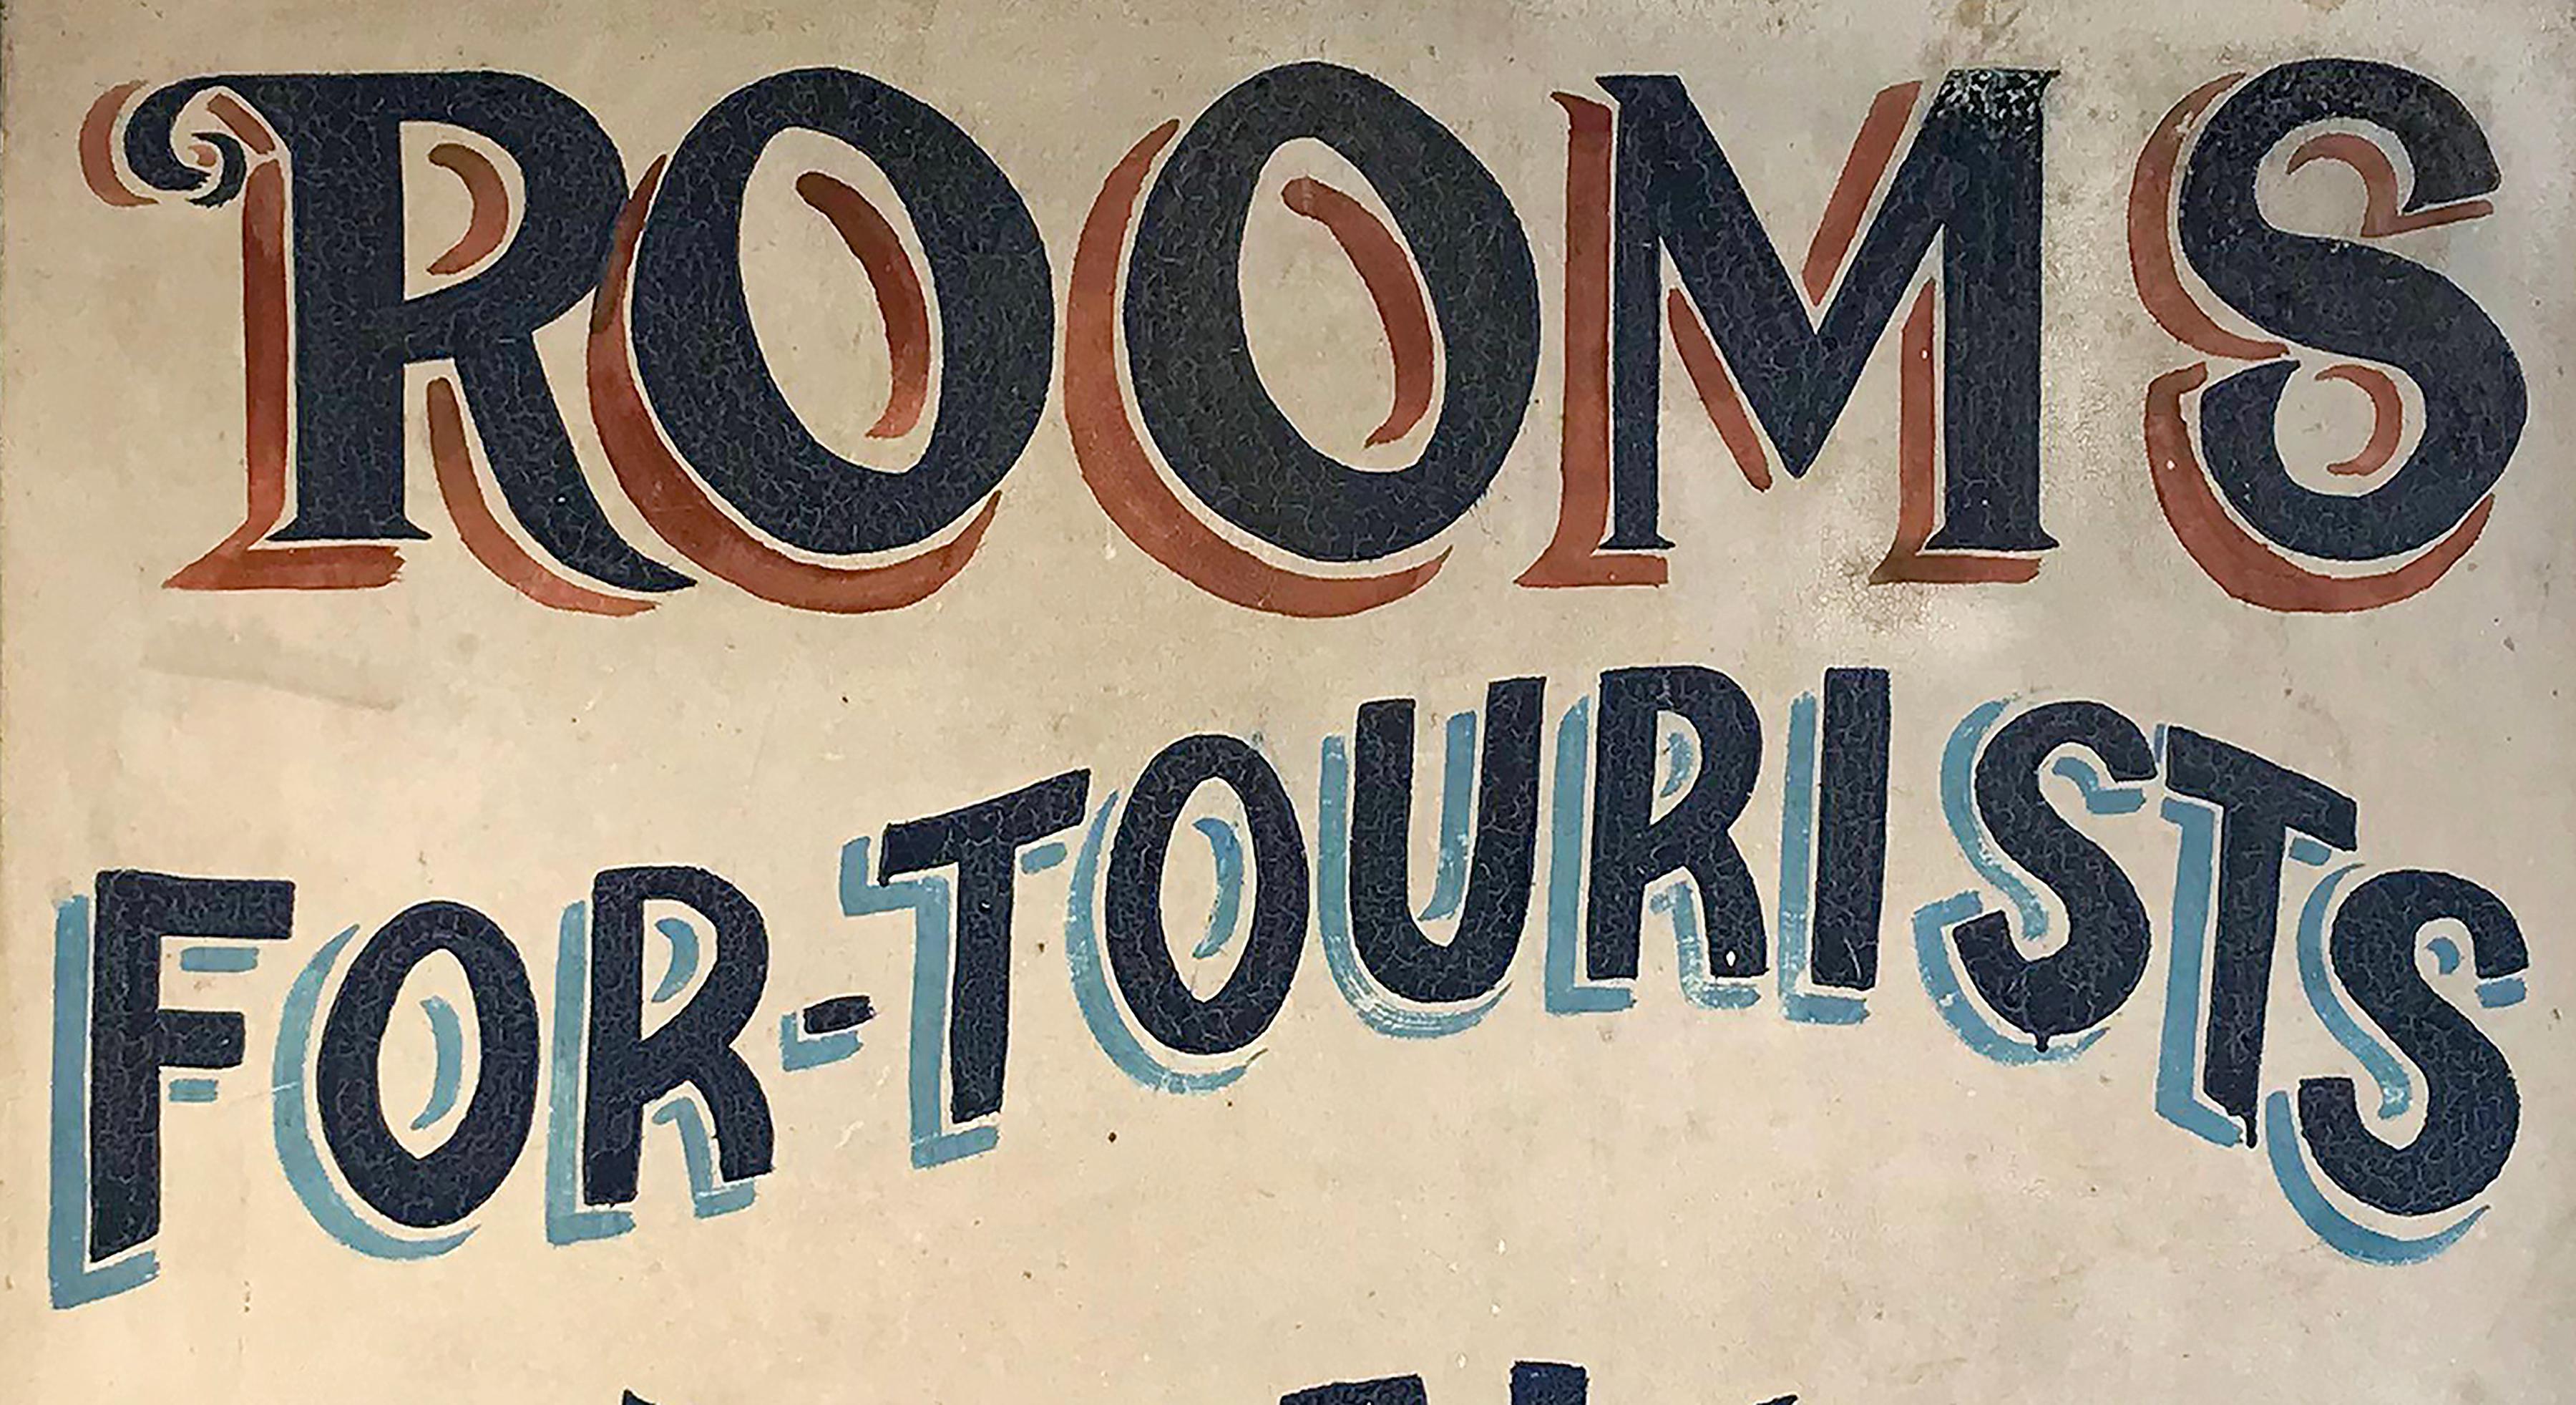 North American Trade Sign, Rooms or Tourists, Meals